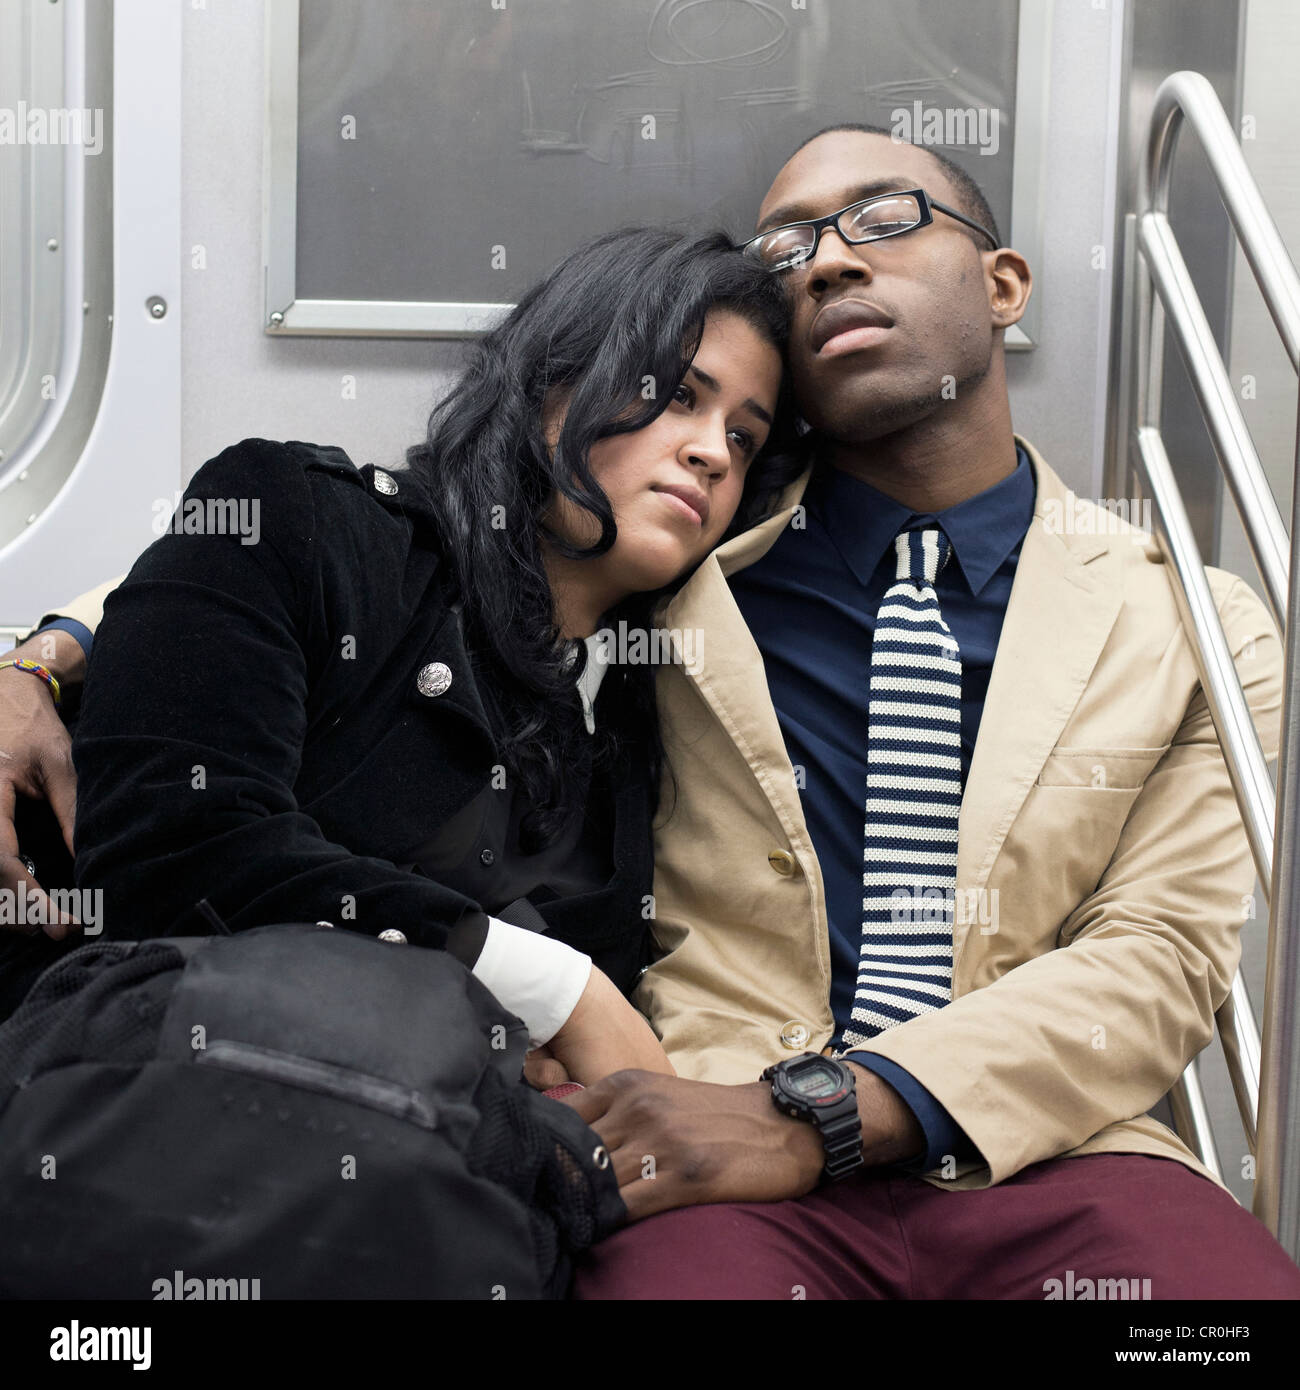 A young couple relaxes together on the subway in New York City. Stock Photo